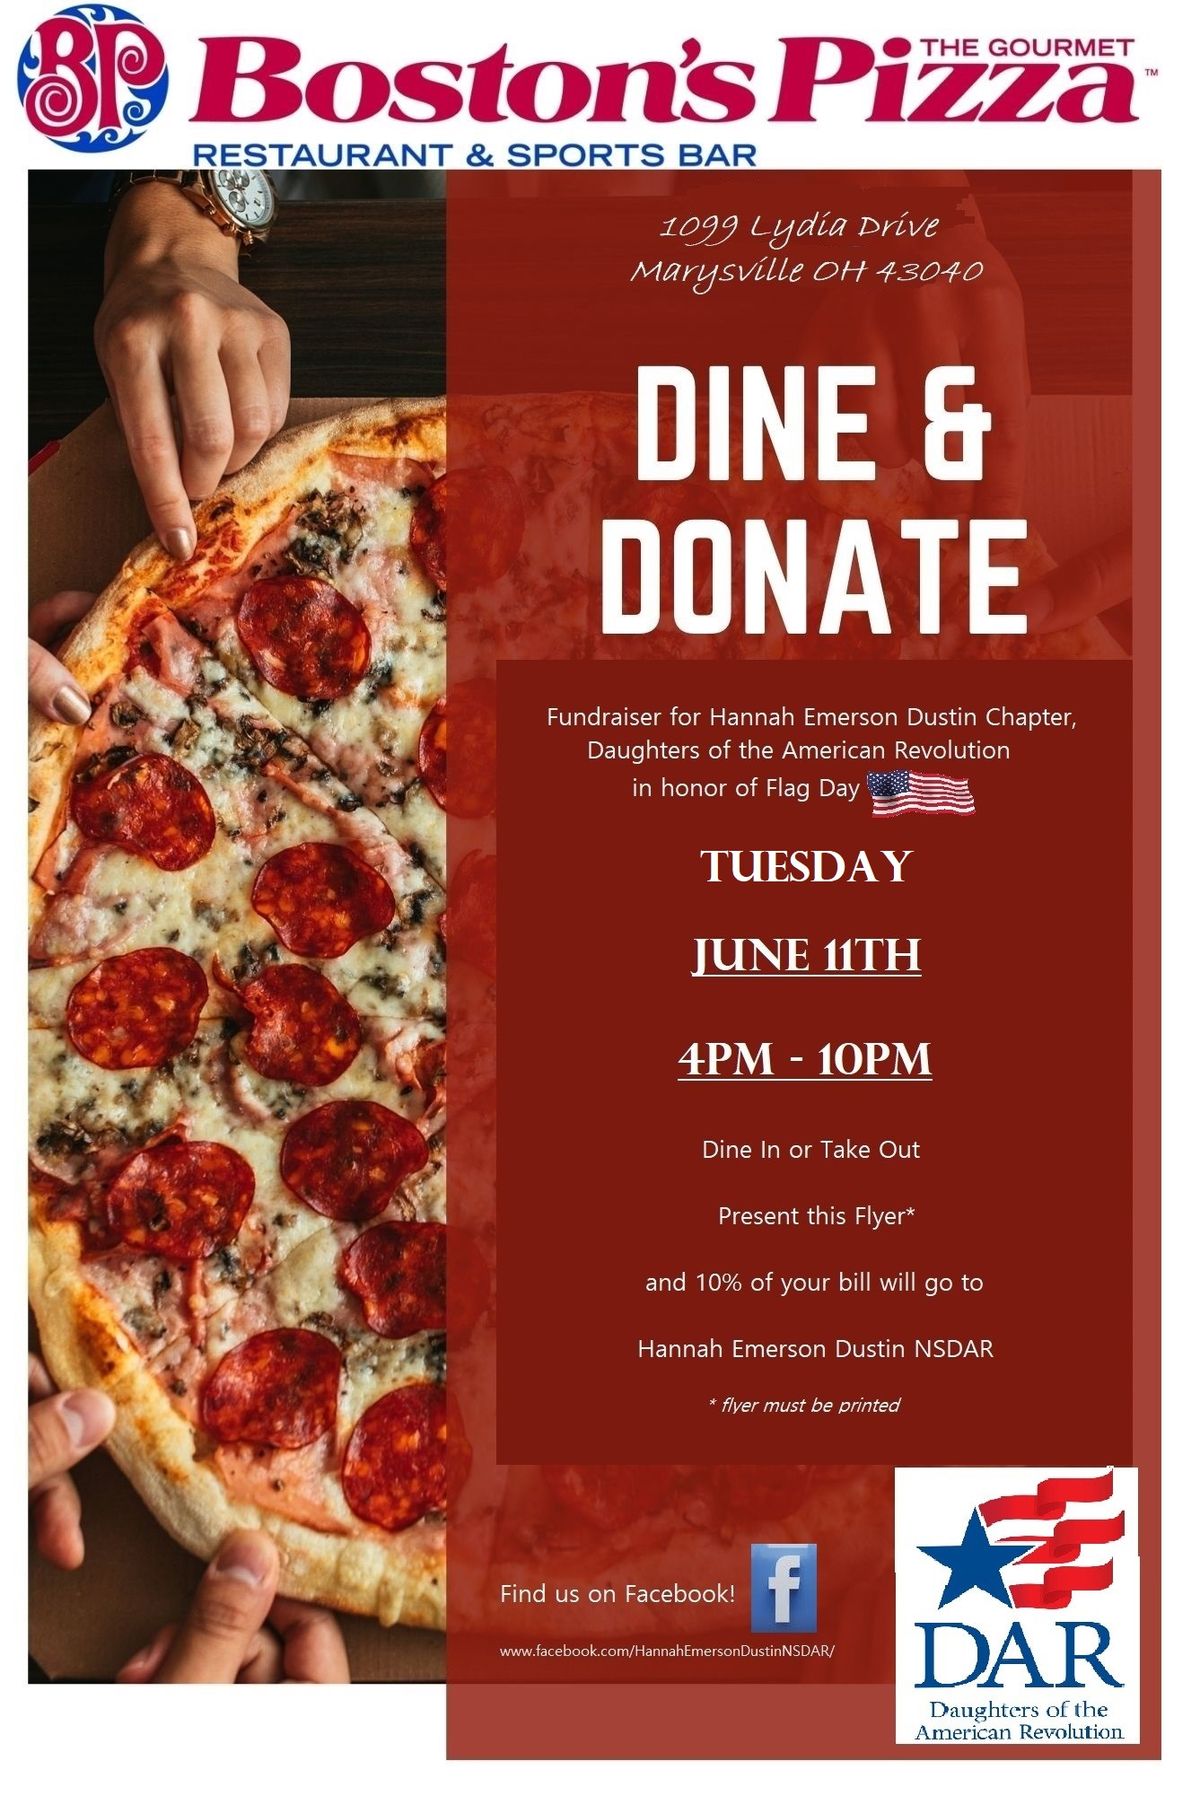 Dine In\/Take Out Fundraiser in Honor of Flag Day \ud83c\uddfa\ud83c\uddf8